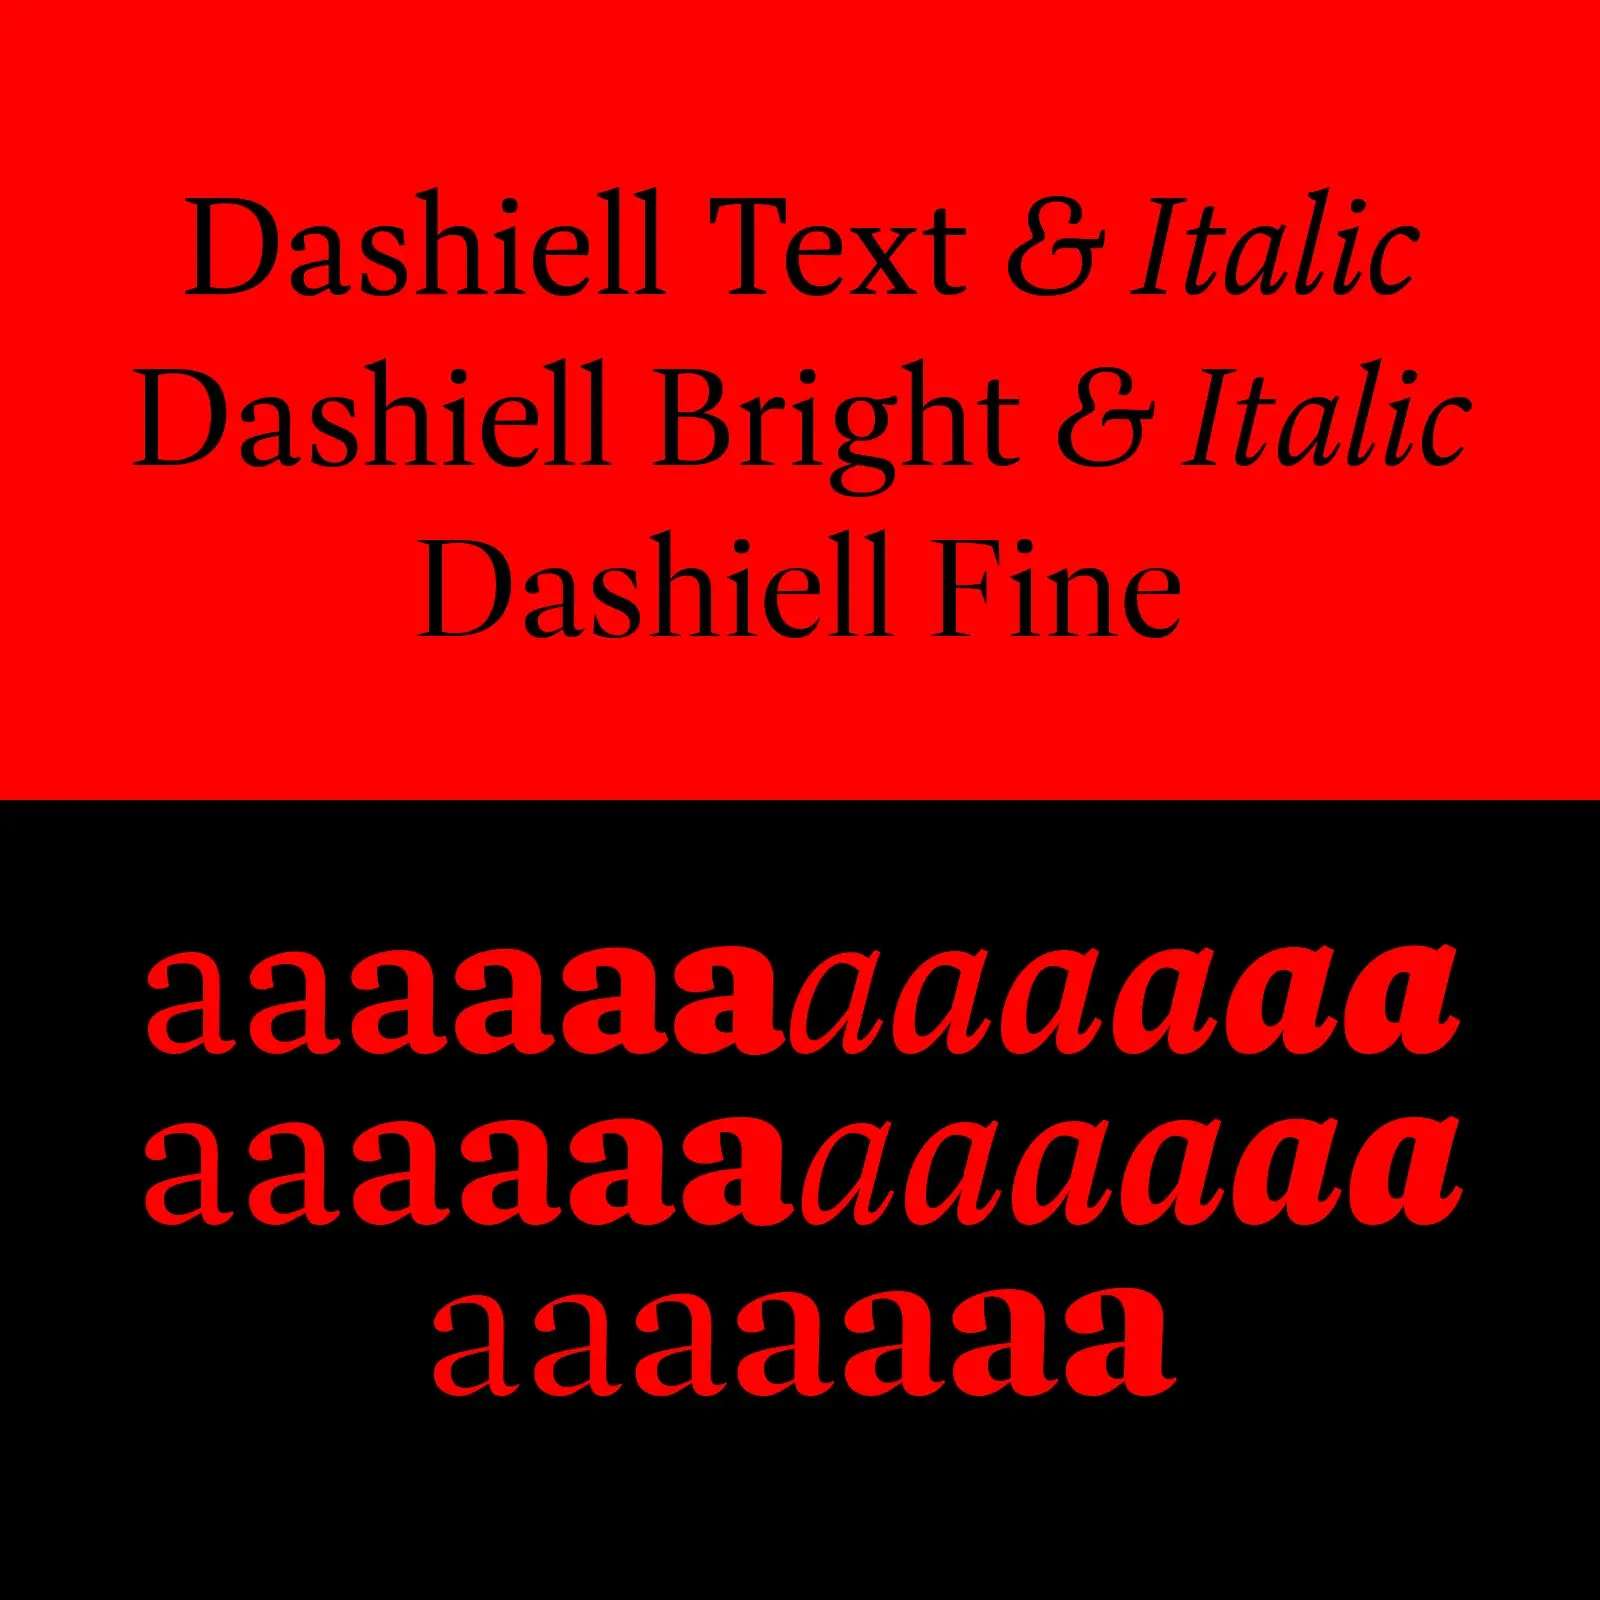 Dashiell's Font on a black background. 